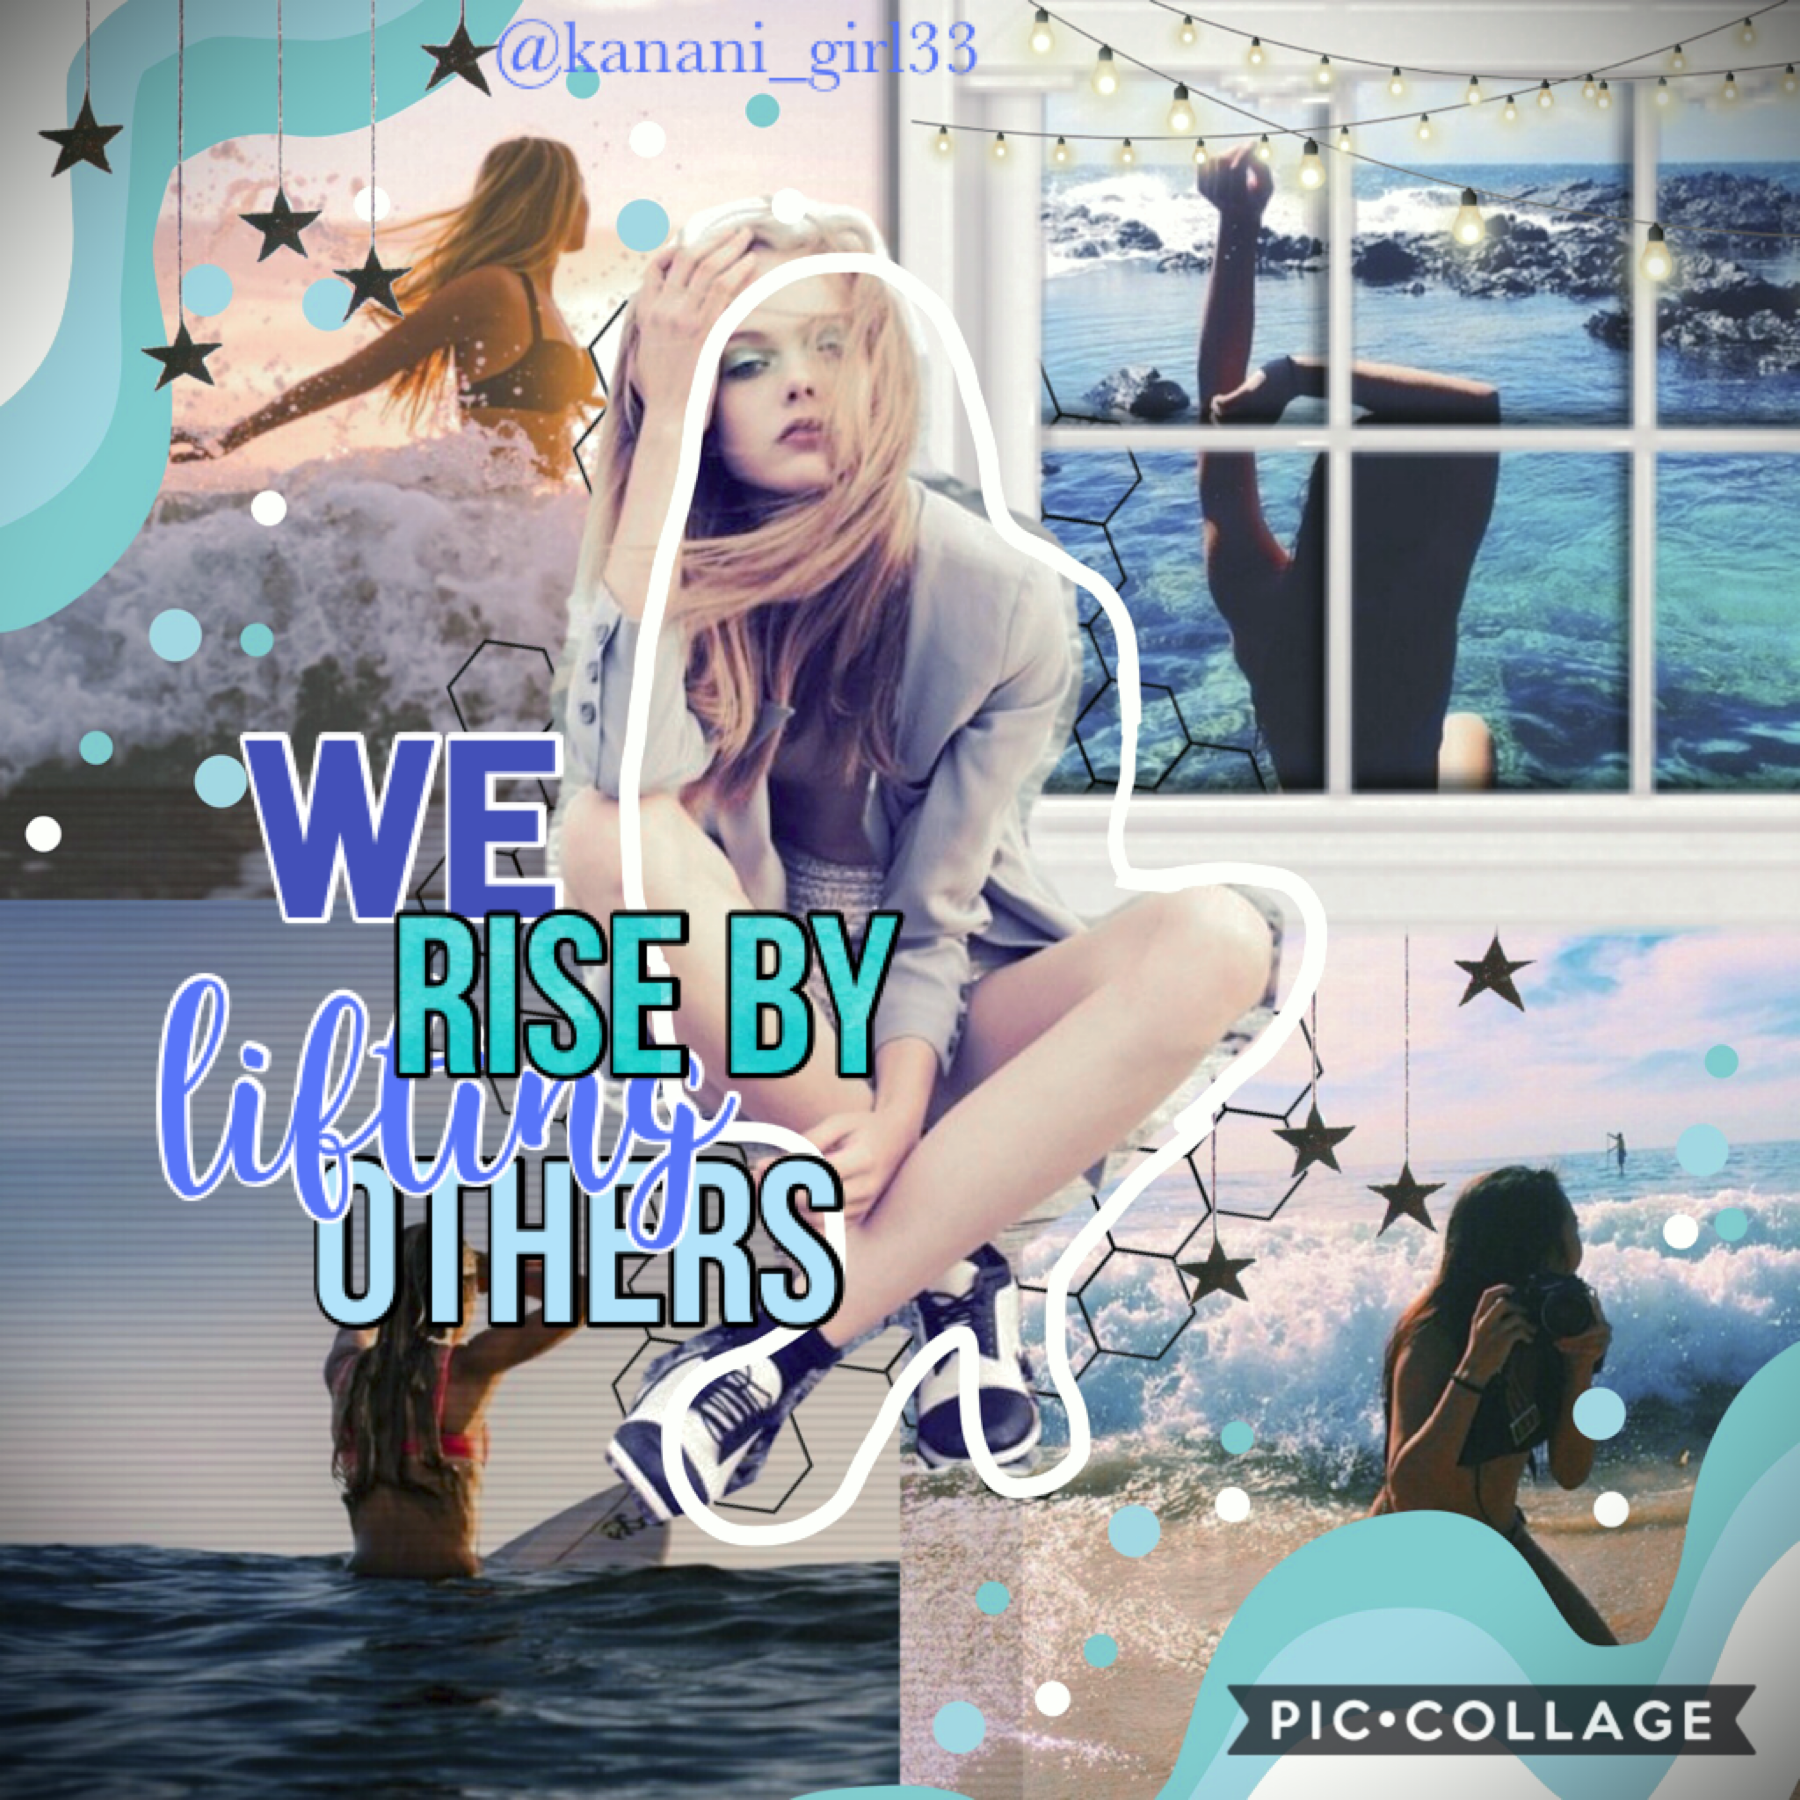 🦋TAP🦋
☆April 5, 2020☆
I hope everyone is safe during this time 💖 don’t forget to check my extras @blessed33- and join my positivity contest 💕 qotw: what have you been doing to keep busy? 